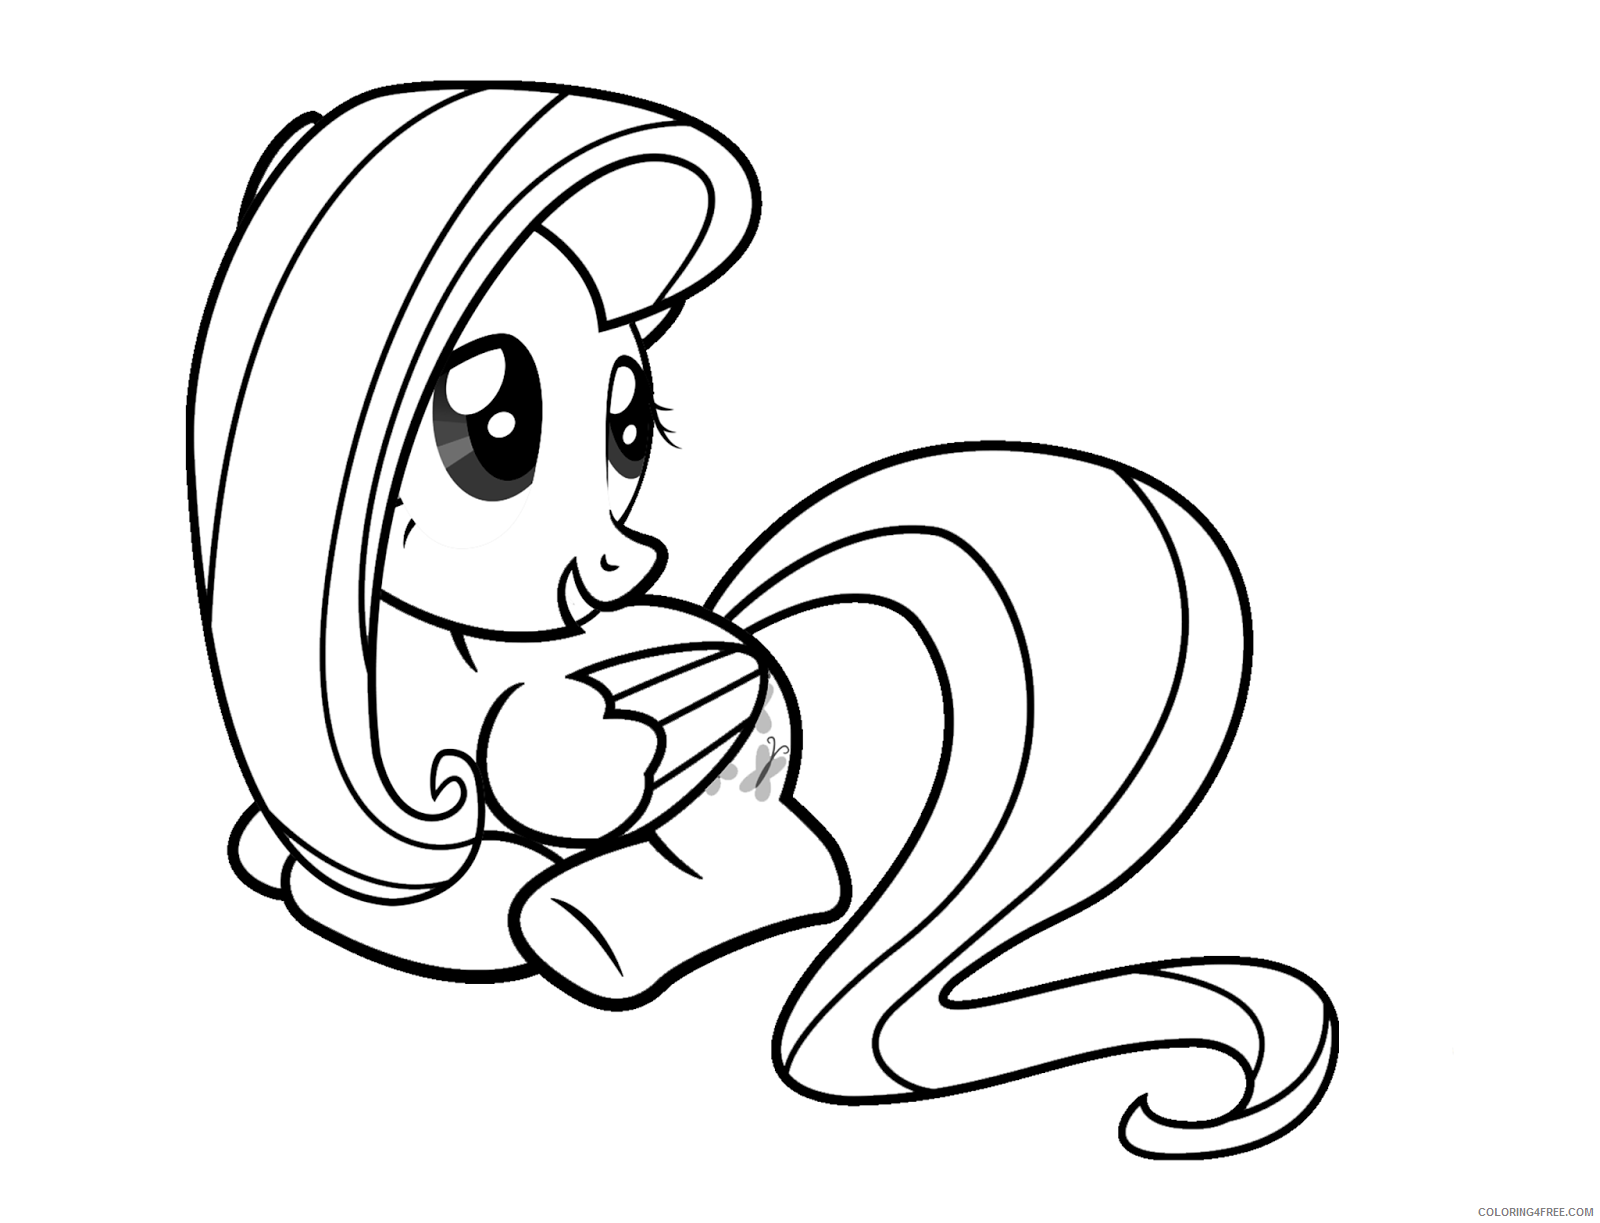 Fluttershy Coloring Pages Download Fluttershy Printable 2021 2674 Coloring4free